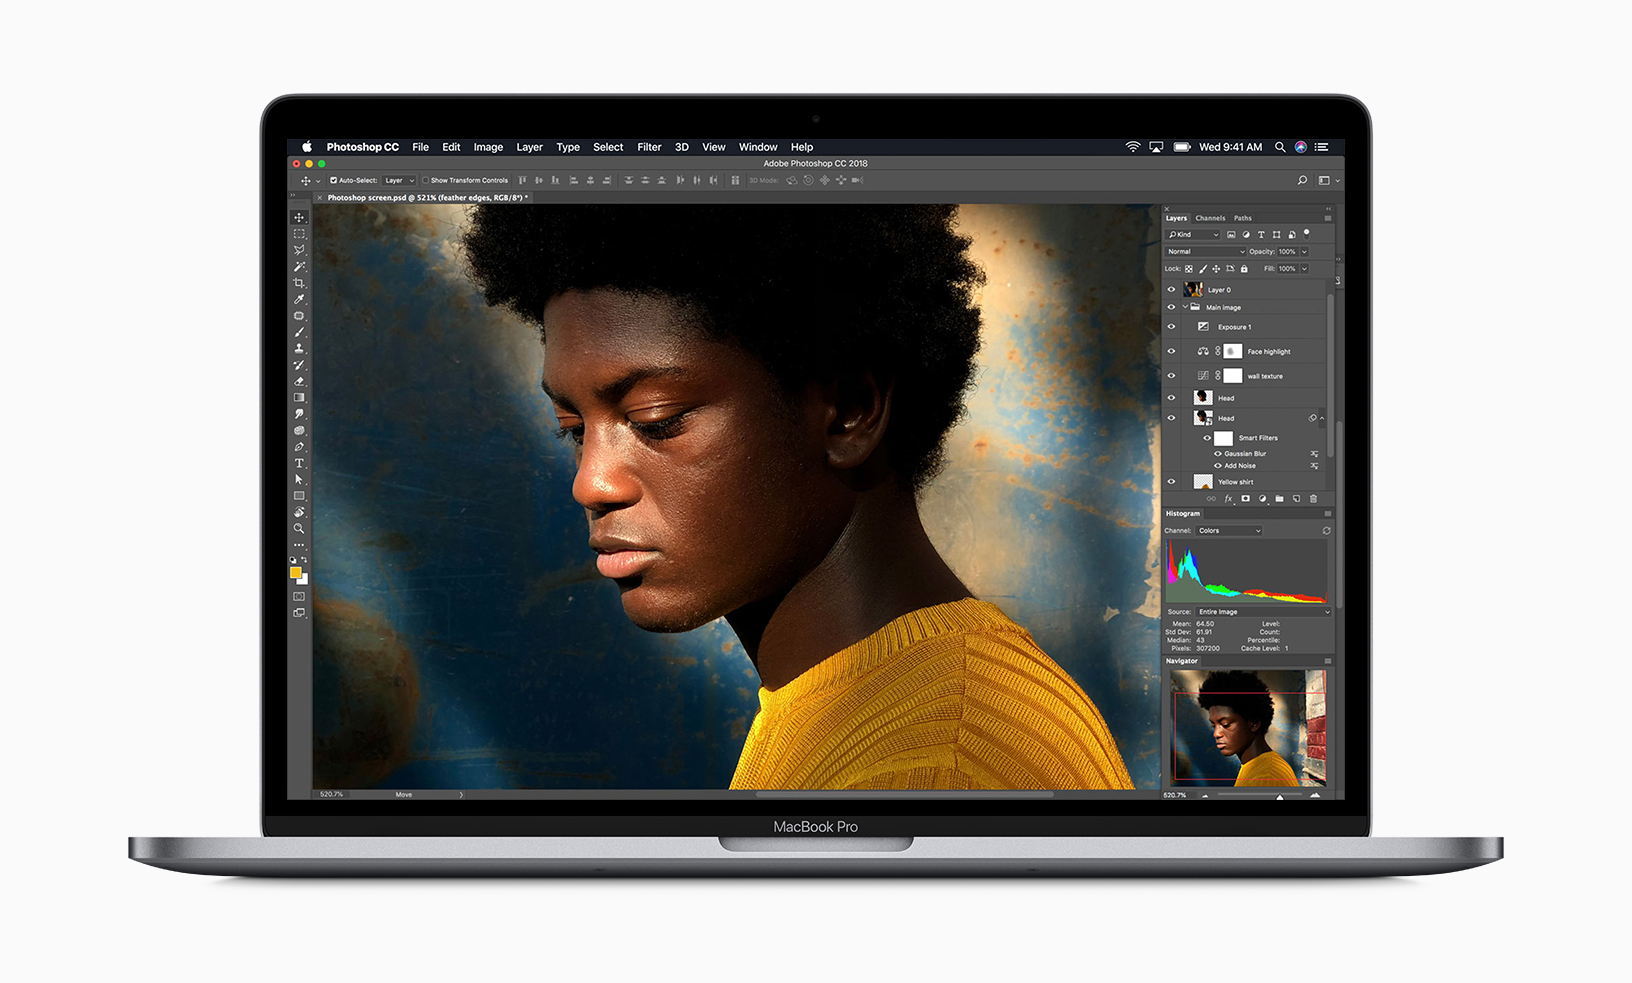 apple macbookpro 8 core macos mojave adobe photoshop 05212019 - Apple Debuts New 8-Core MacBook Pro With Updated Keyboard